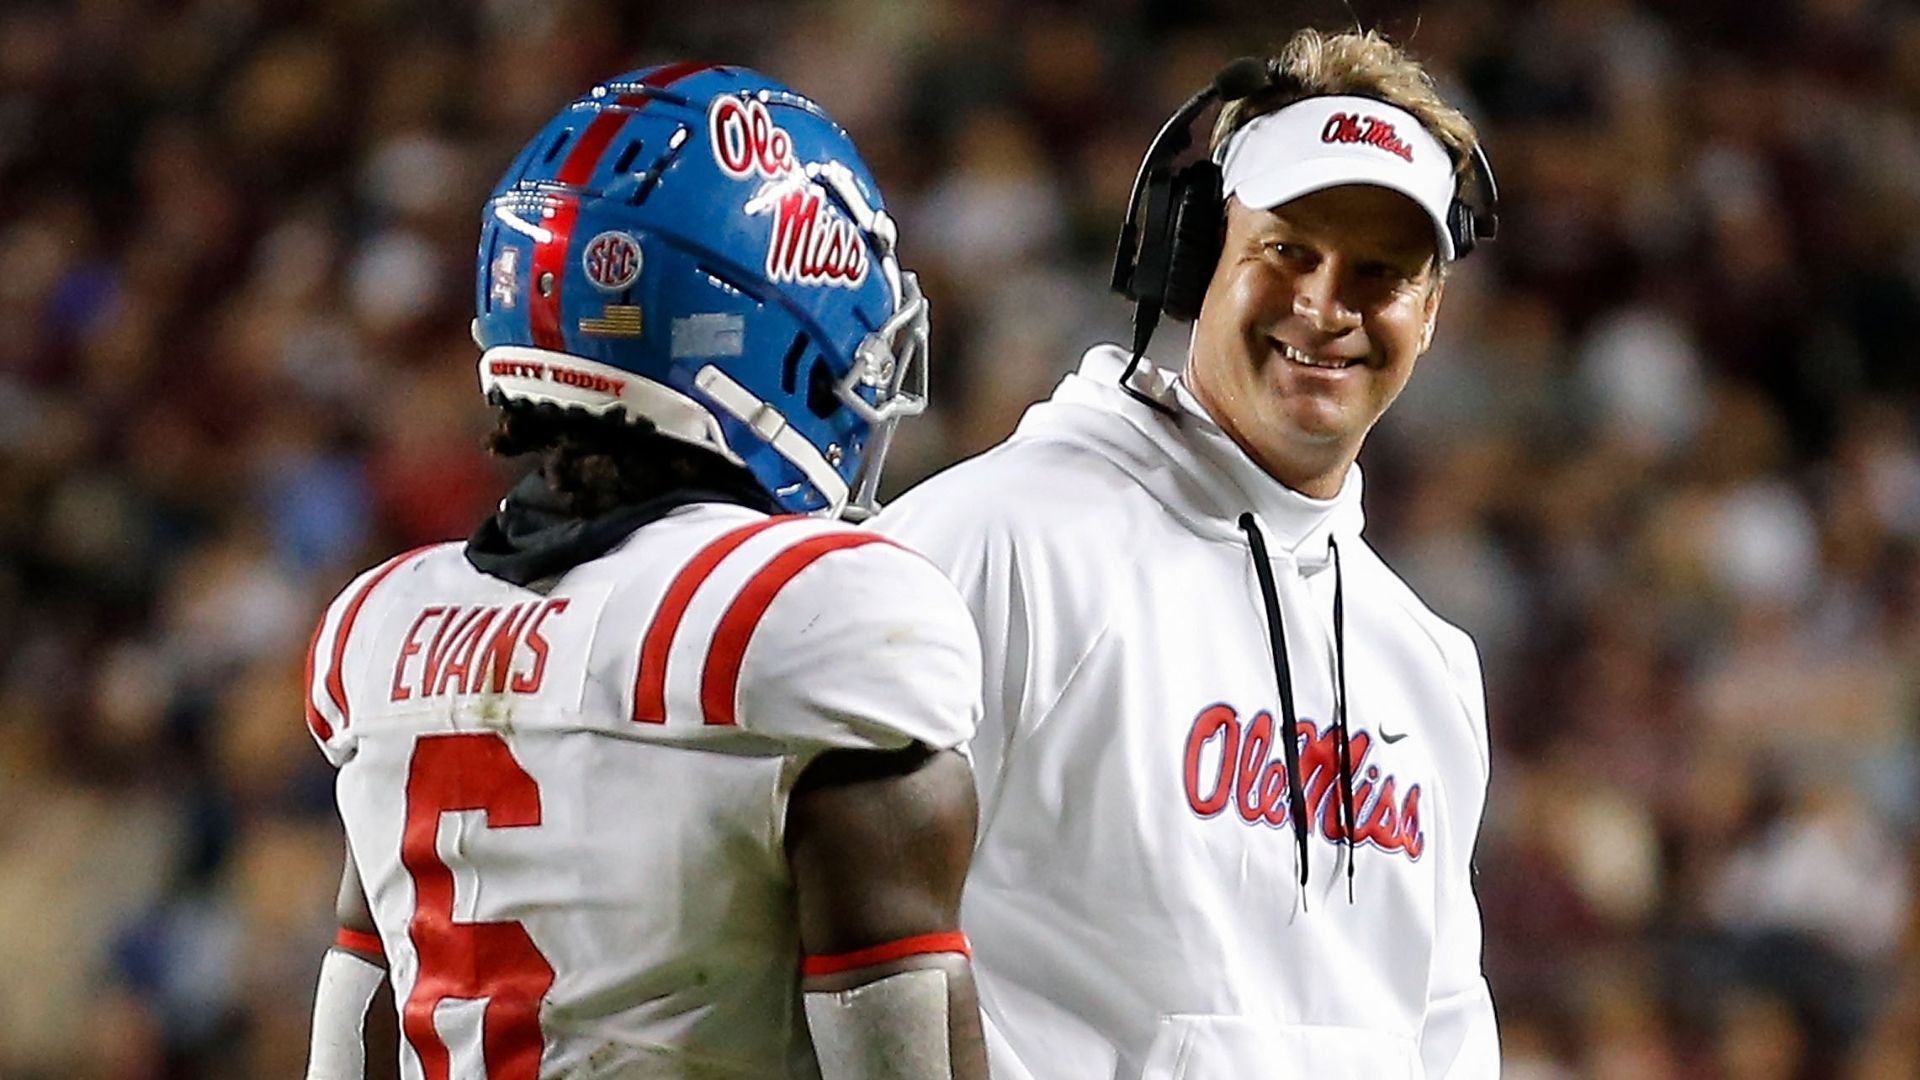 Ole Miss looking for redemption heading into Texas Bowl